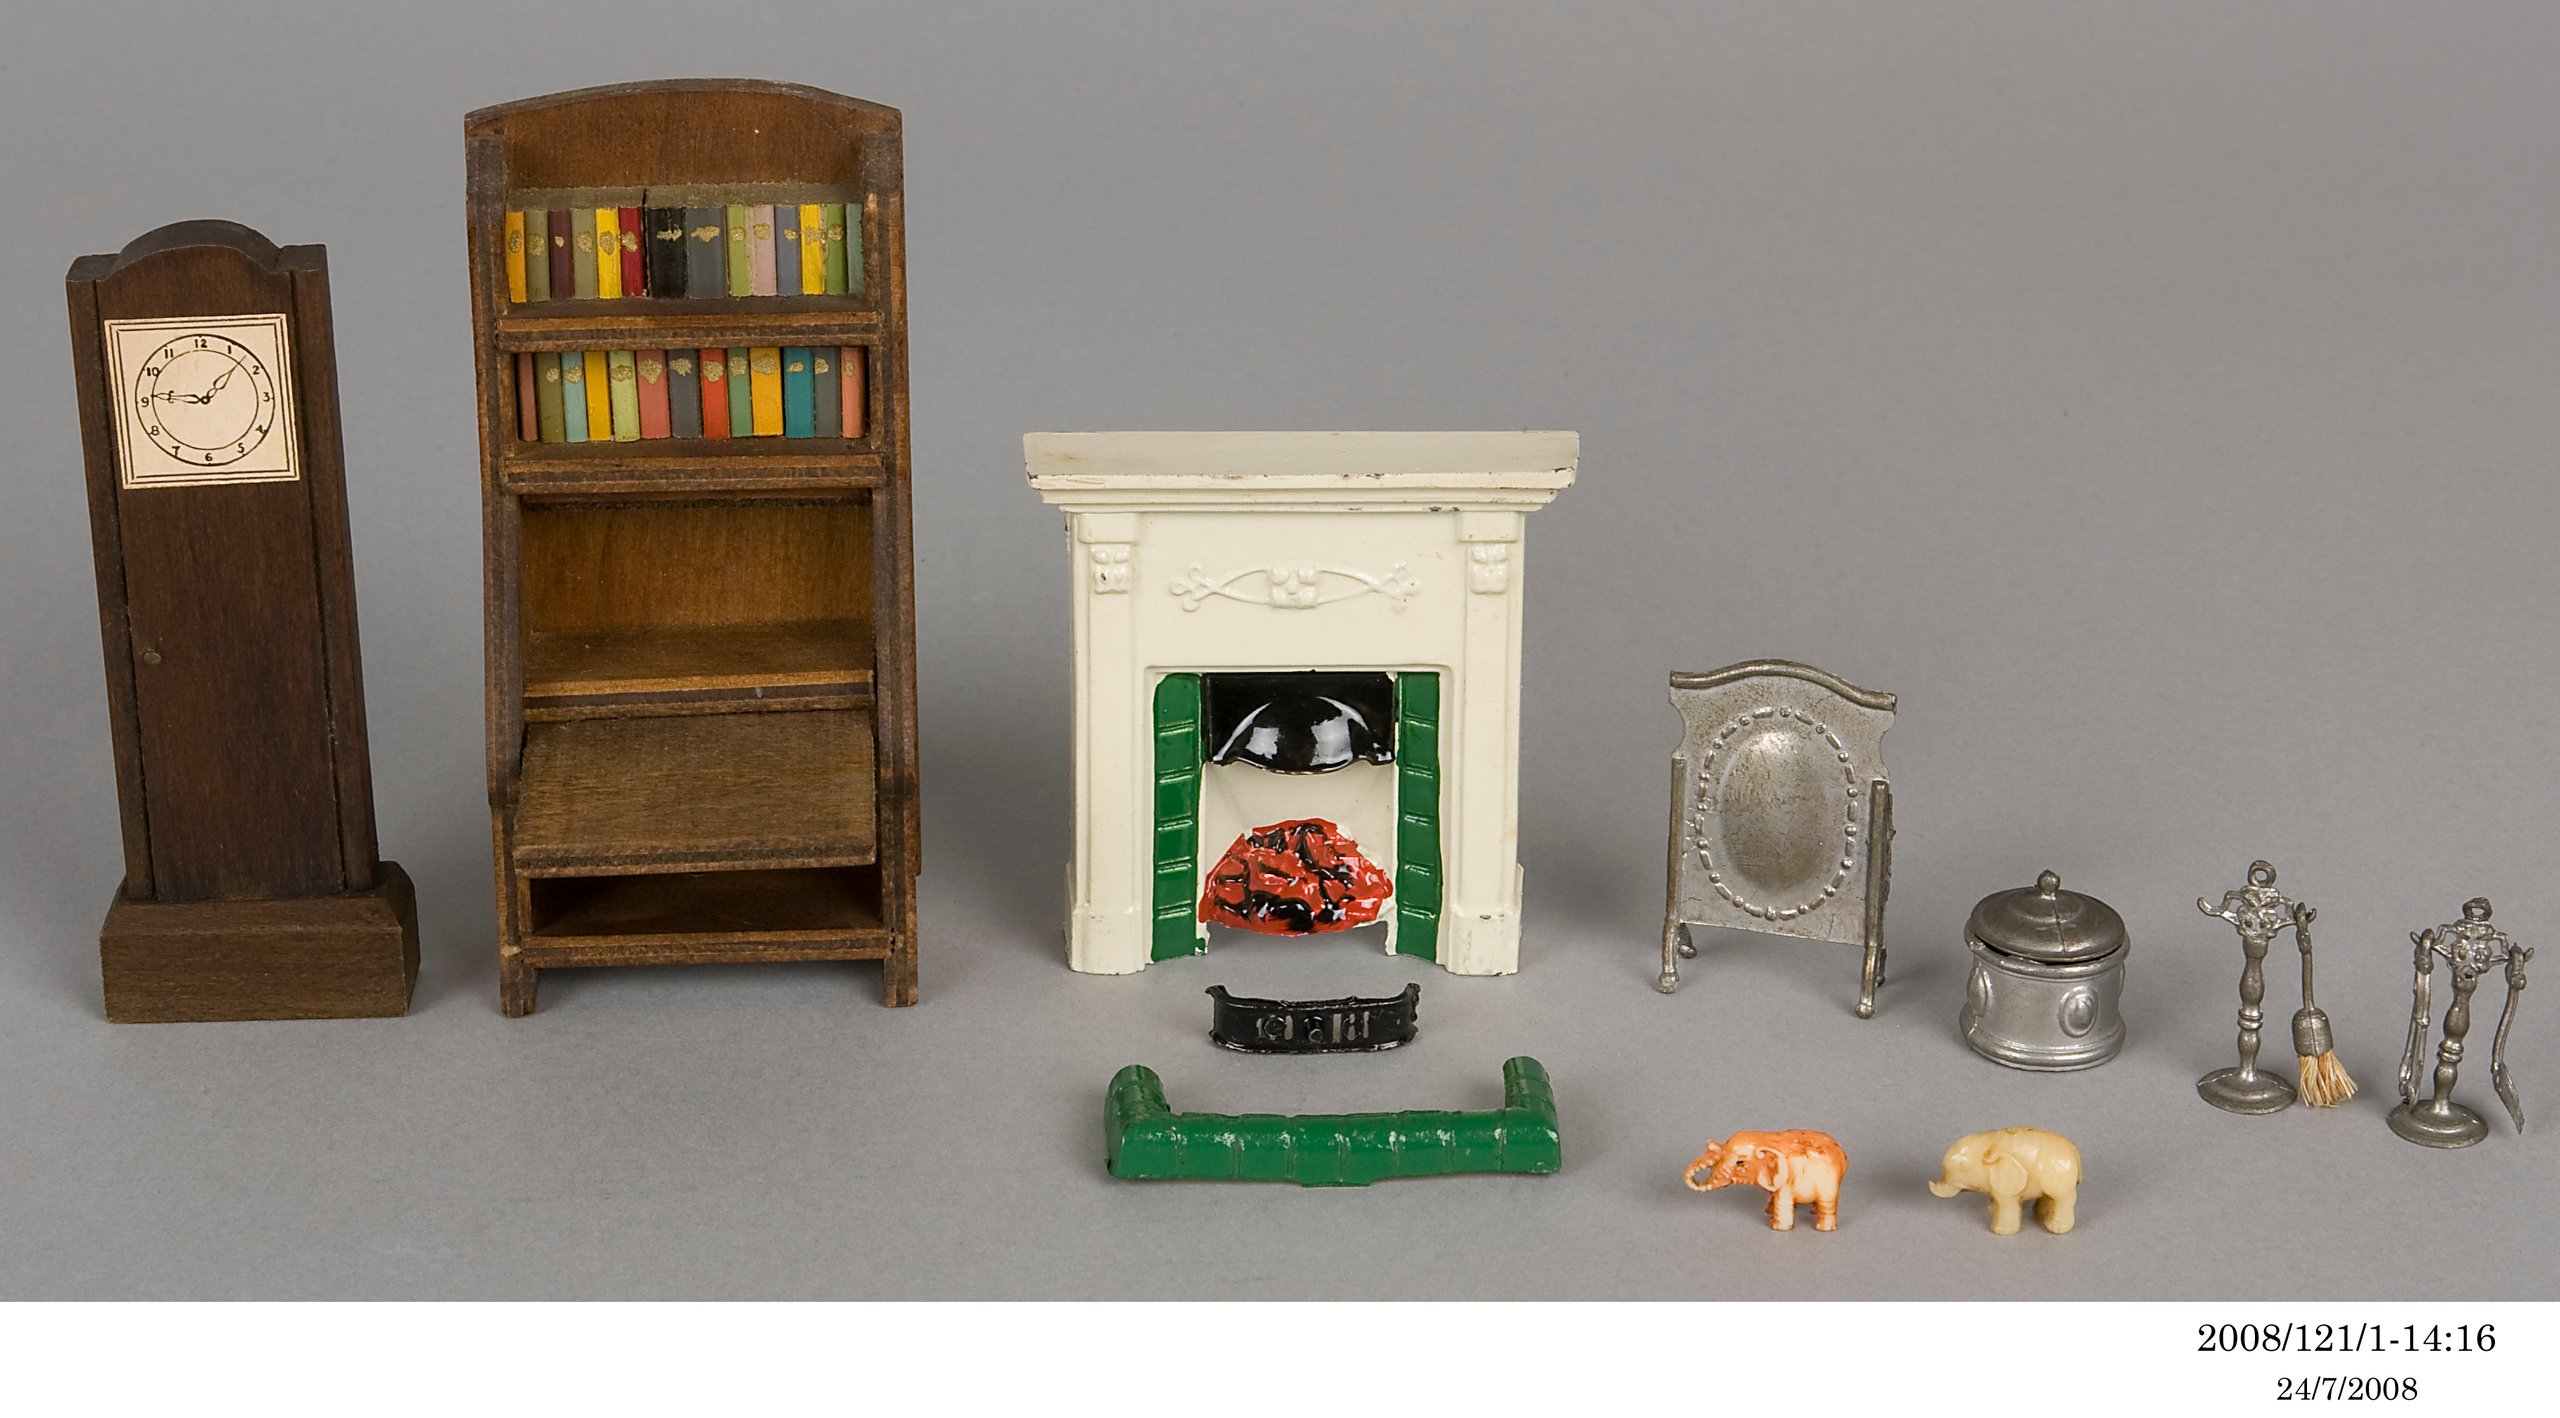 Doll's house and contents